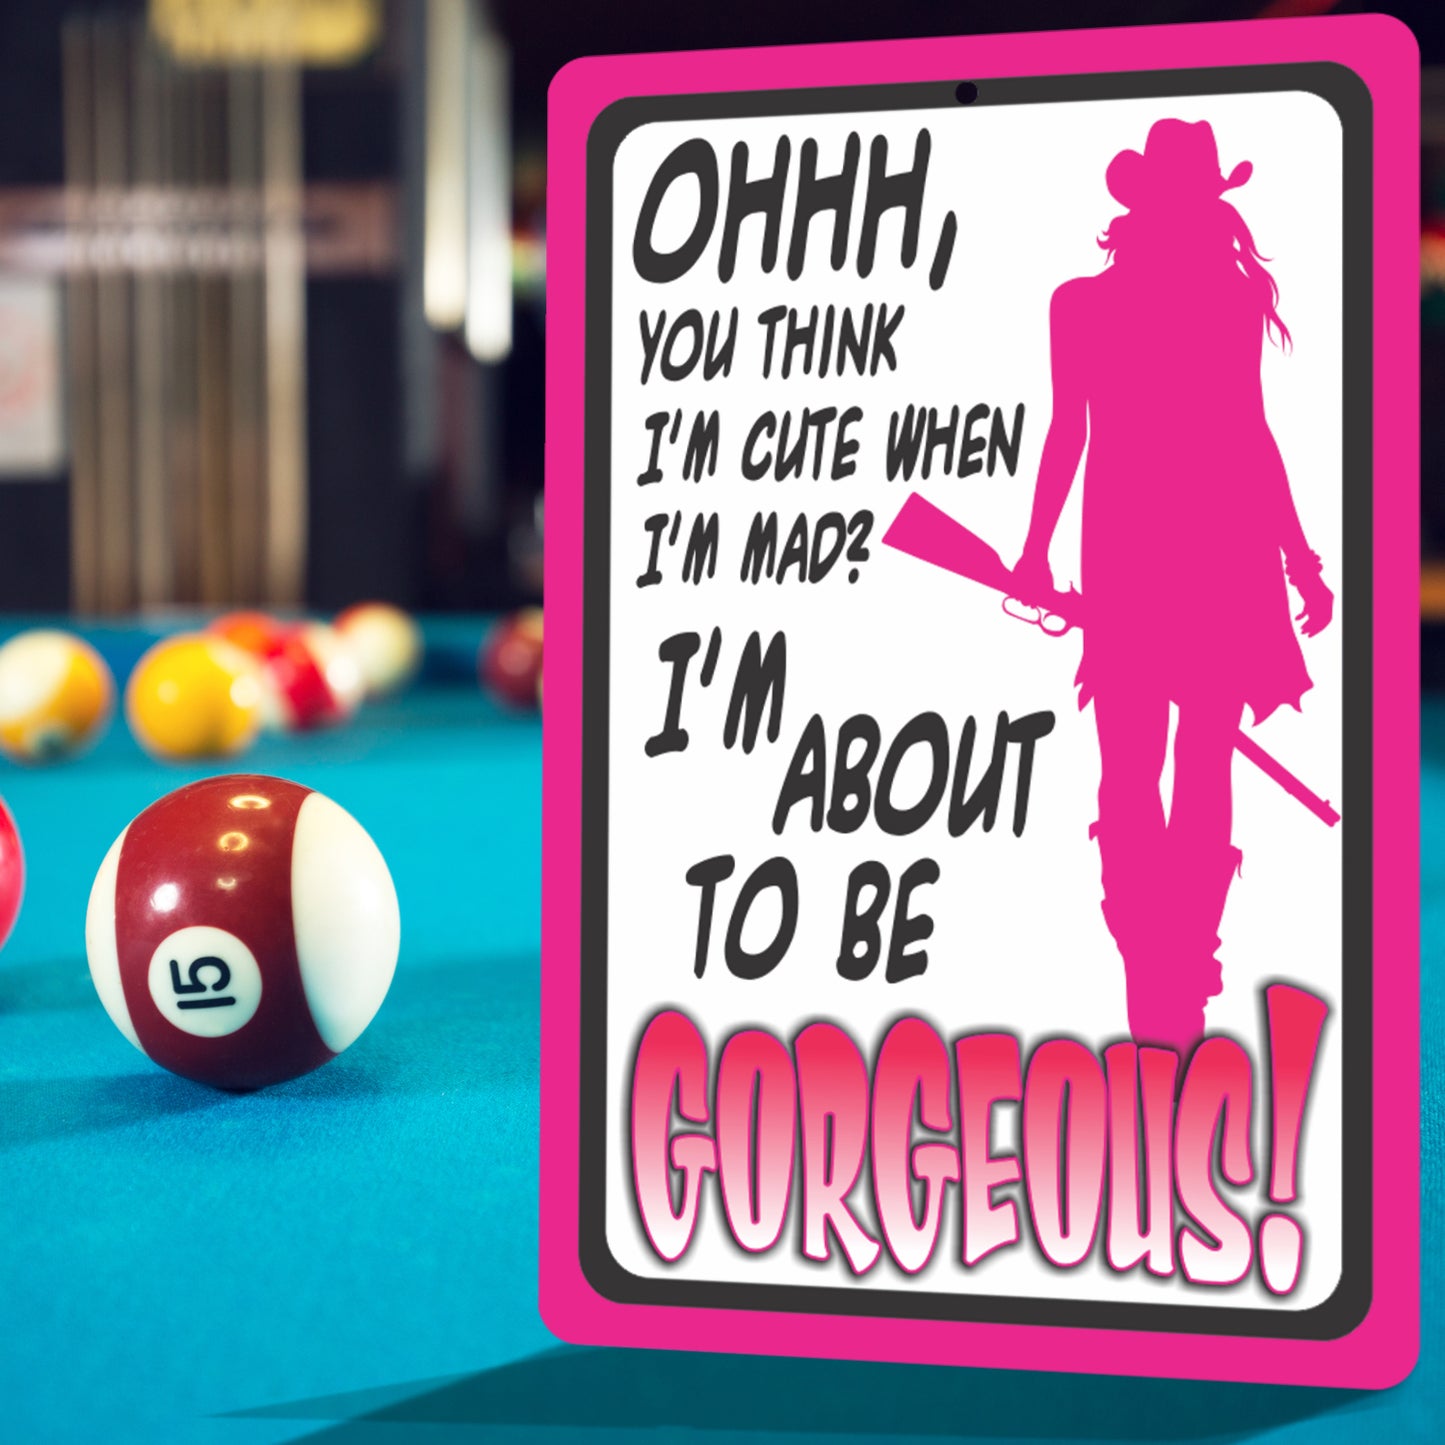 Funny Metal Warning Sign for Bars - Ohhh, You Think I'm Cute When I'm mad? I'm About to be Gorgeous! (Pink) - Size 8 x 12